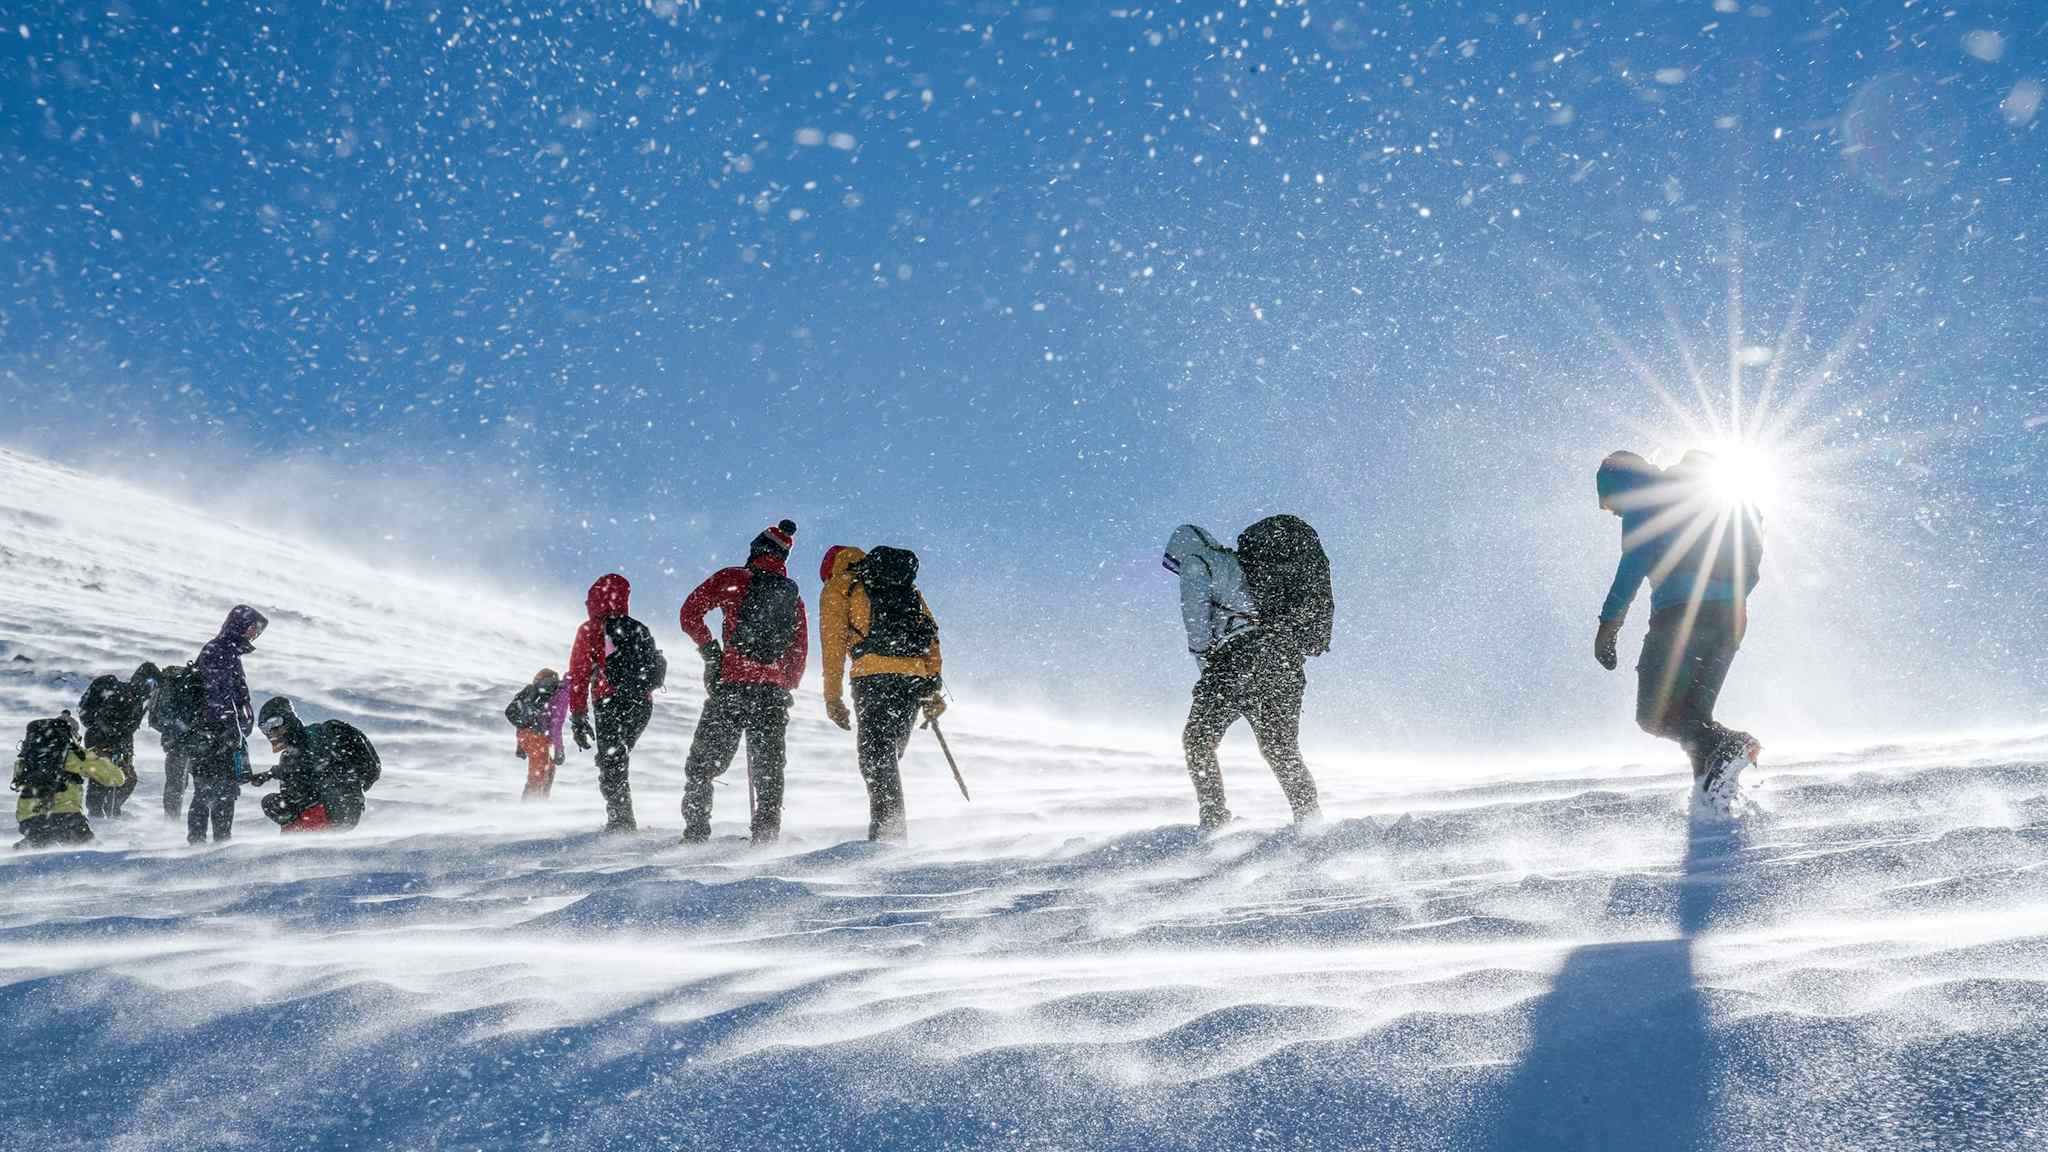 Trekkers in the snow with sun flare